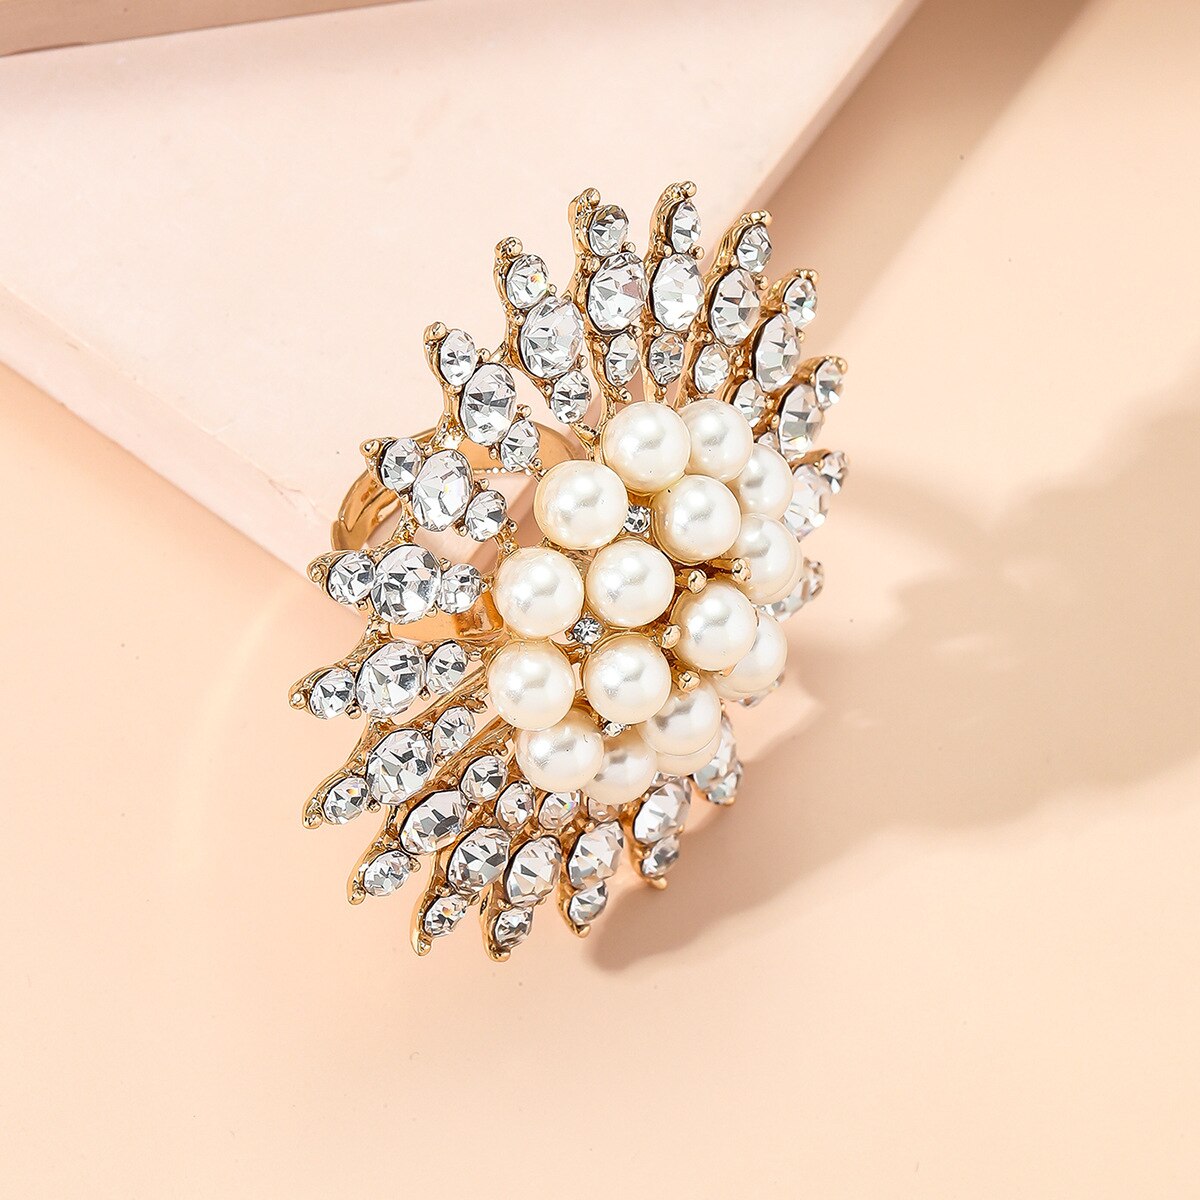 Luxury-Oversized-Zircon-Pearl-Engagement-Ring-for-Bride-Exquisite-Gorgeous-Flower-Wedding-Jewelry-Go-1005004987525159-4